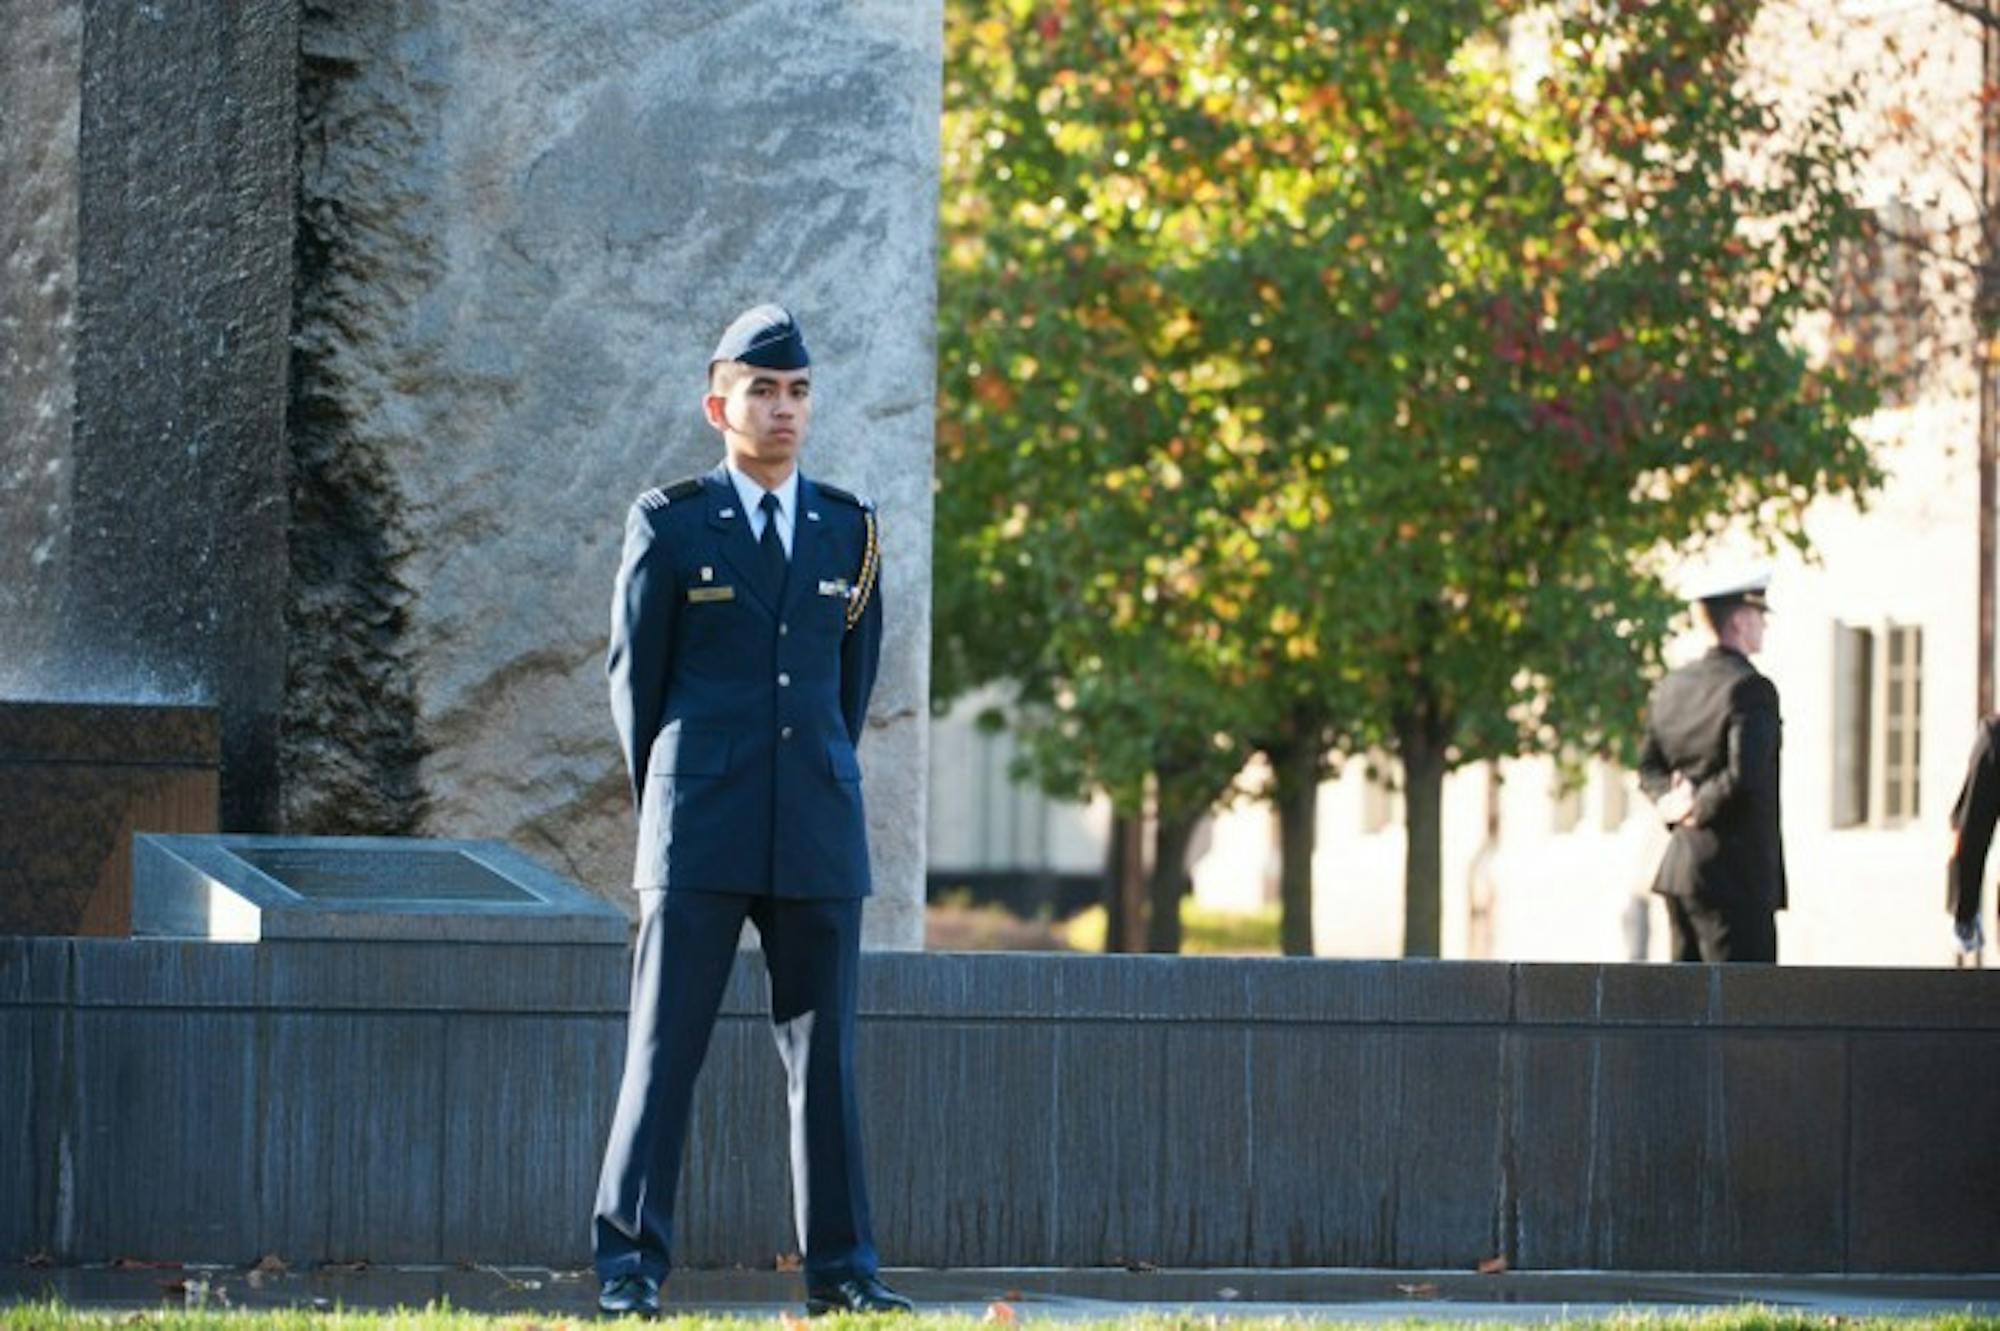 In observance of Veteran’s Day, the Notre Dame ROTC units stood vigil for 24 hours at the Clarke Memorial Fountain, known popularly as “Stonehenge,” to honor the men and women who have served.